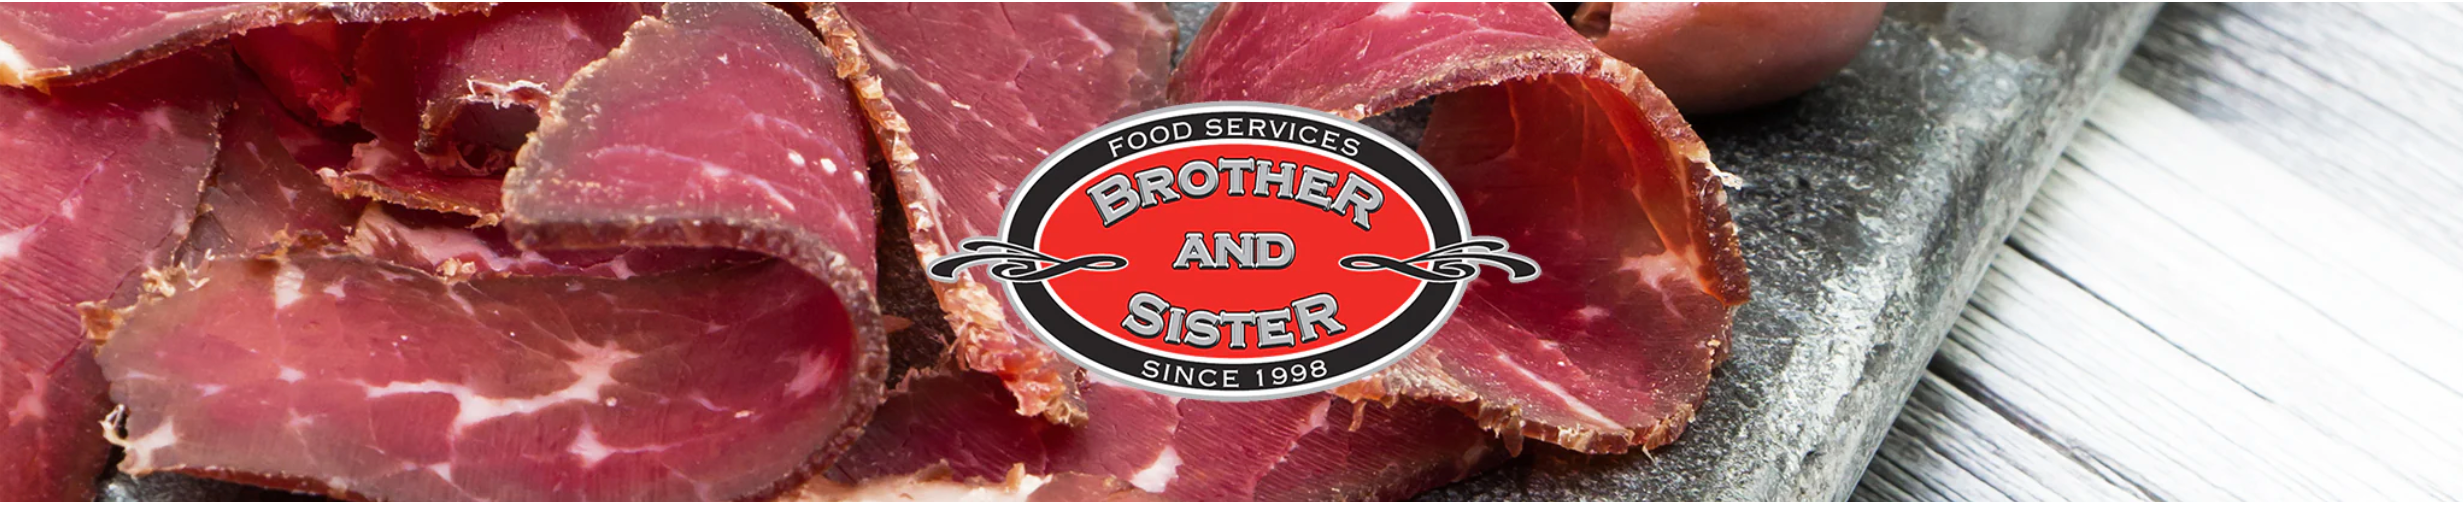 Brother & Sister Smoked Meats, Brother and Sister Meats, Brother & Sister Suho Meso, Brother & Sister Smoked Beef - Global Imports & Exports - Wholesale European Food Distributors